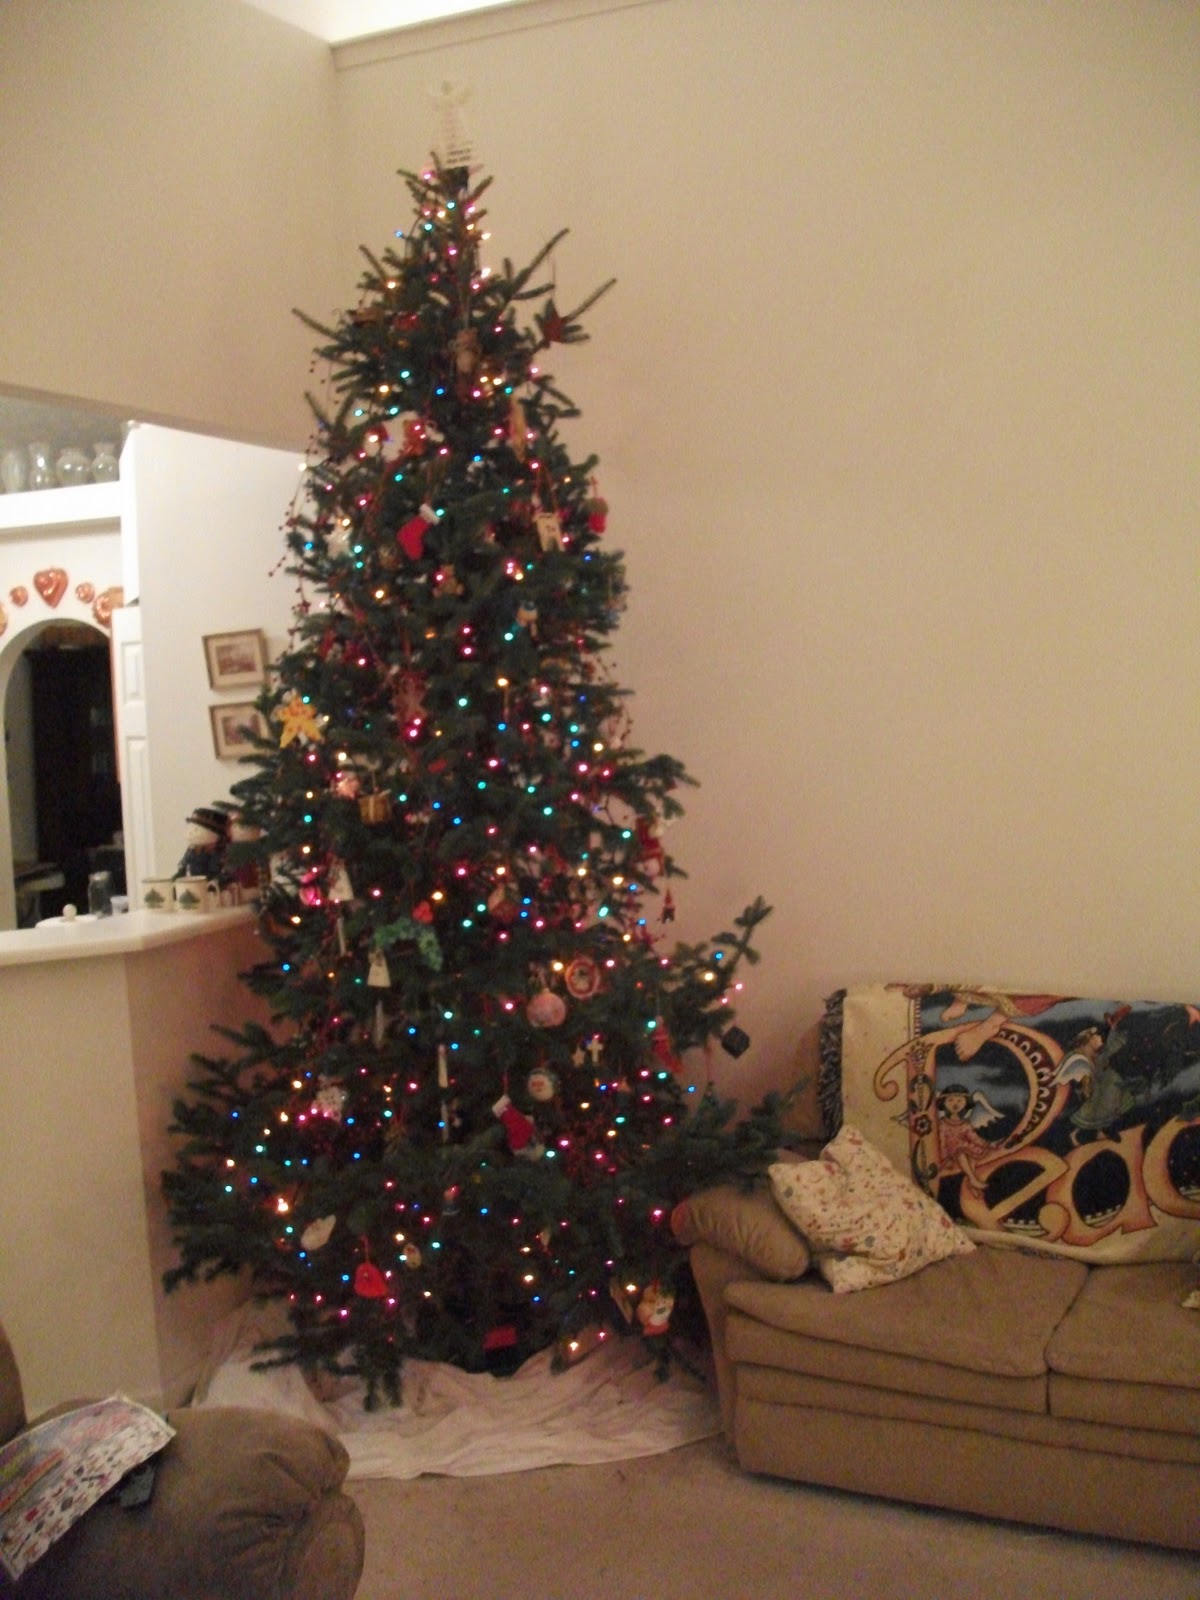 Yuletide Session: O Christmas Tree (part two)